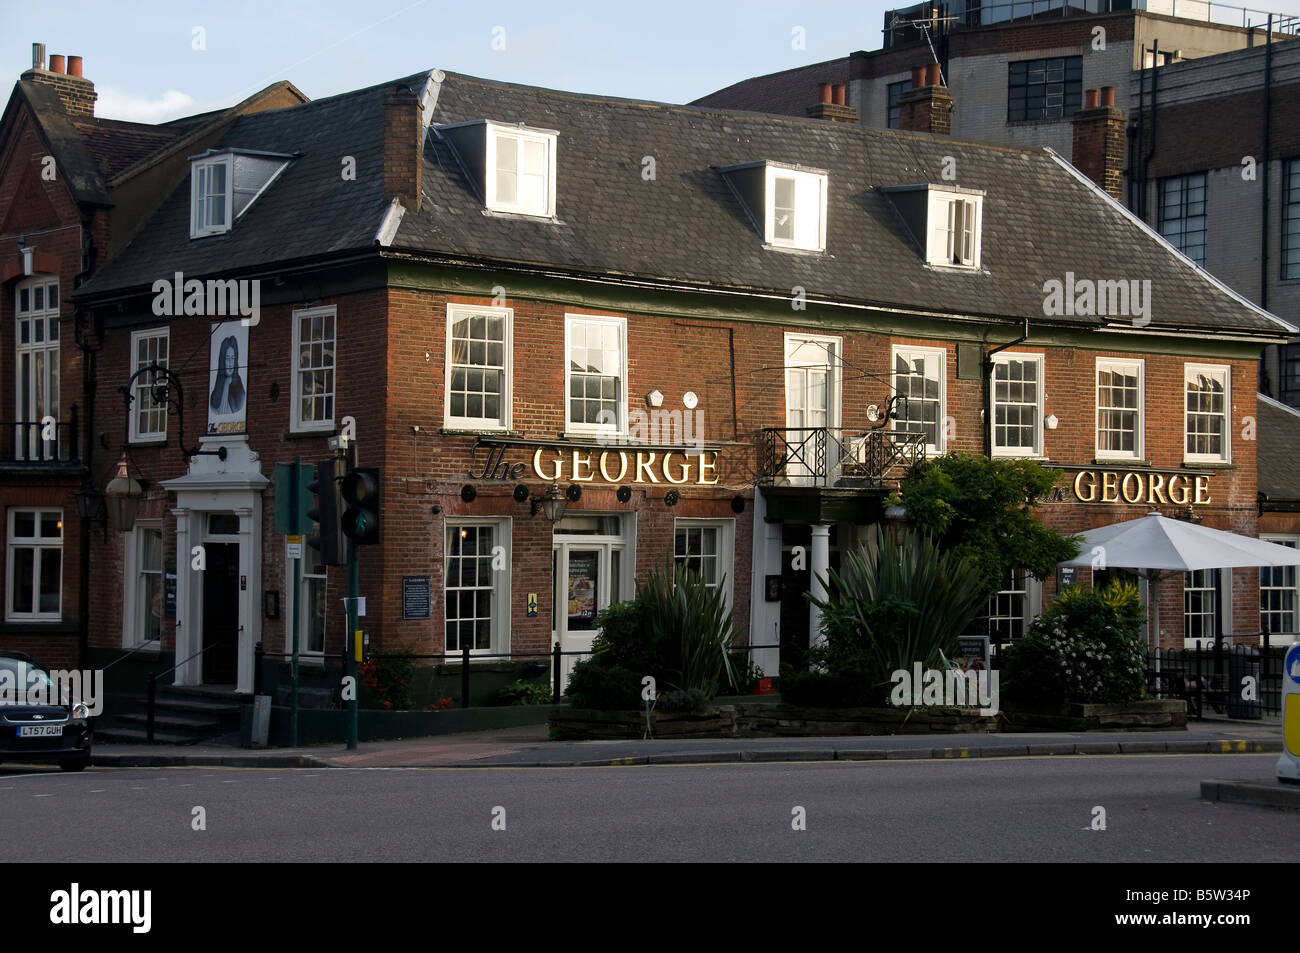 George Pub Public House George Lane South Woodford London Essex Beer Drink Drunk Binge Alcohol Alcoholic Drinks Stock Photo